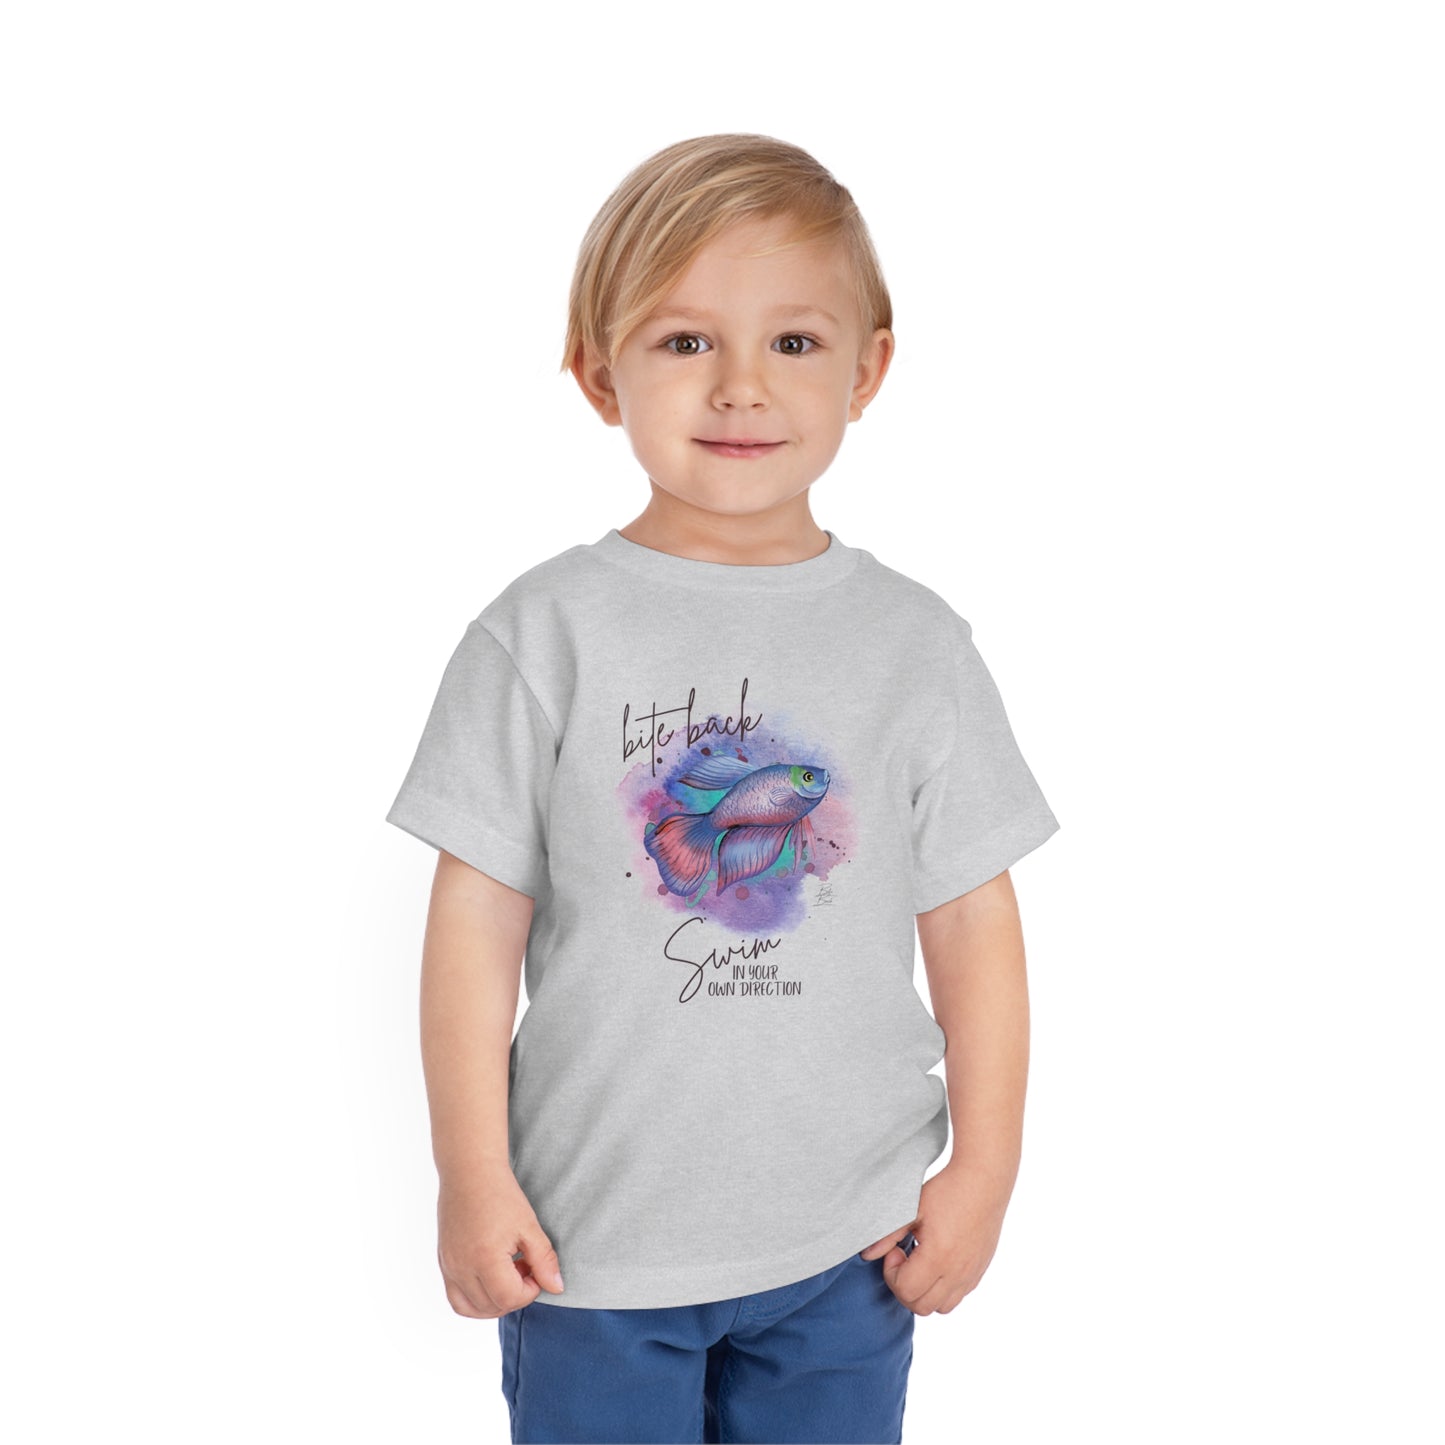 Swim in your own Direction Girls Toddler Short Sleeve Tee